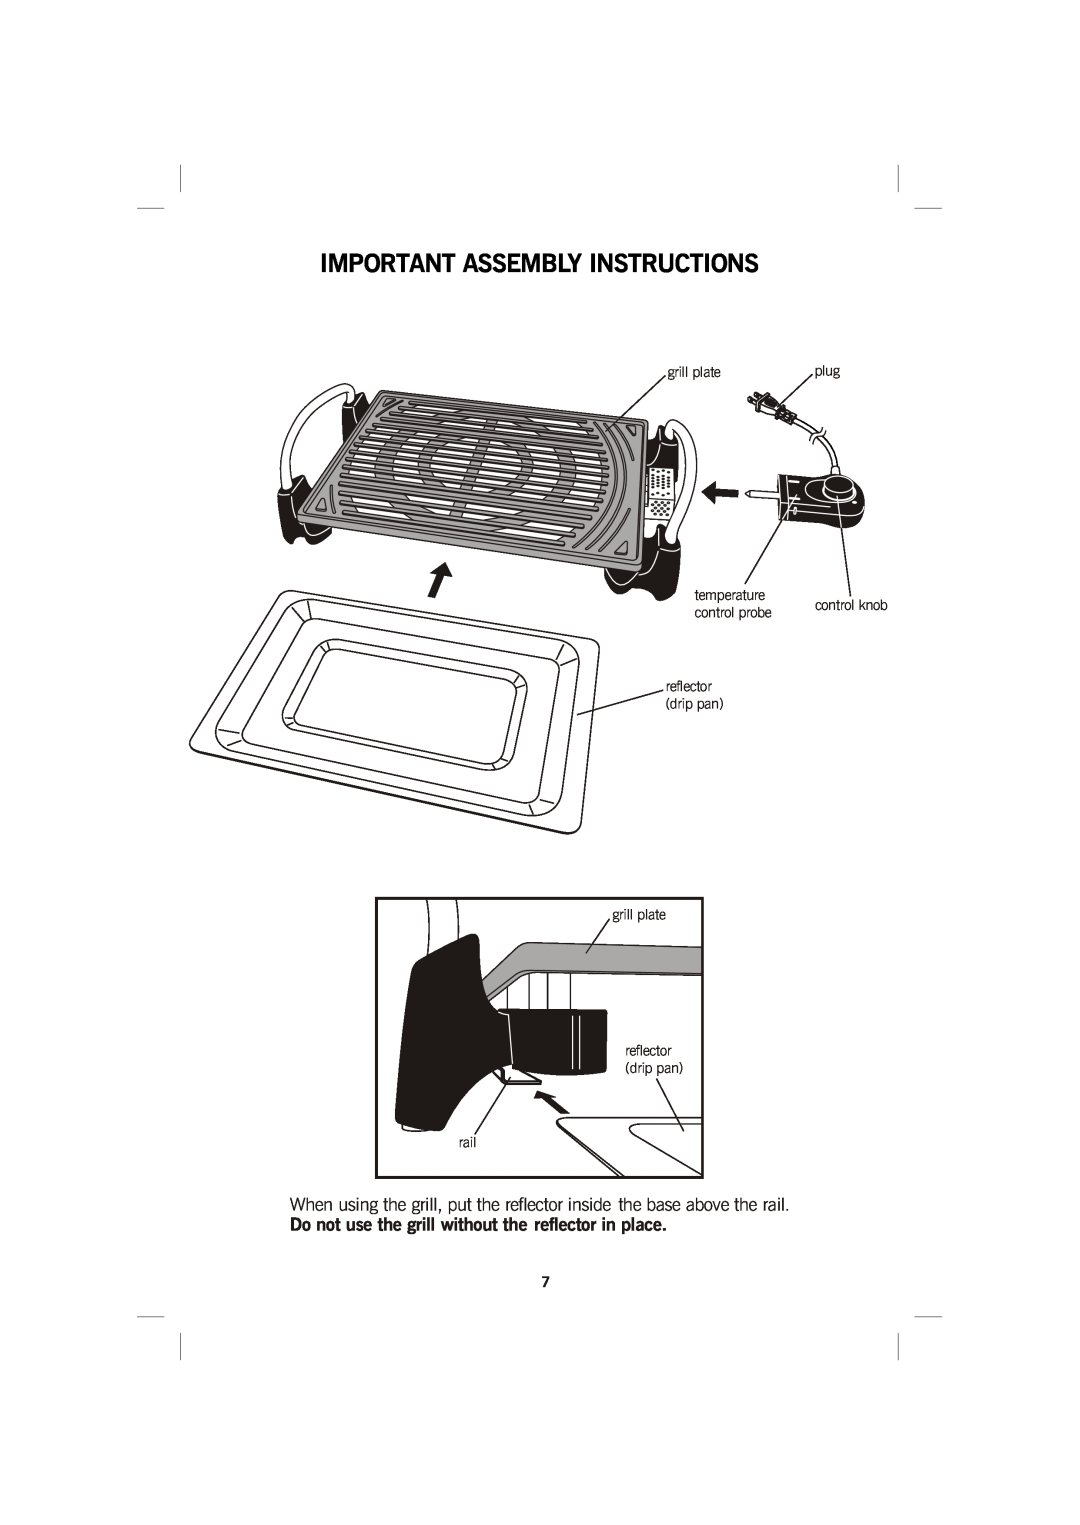 GE 169015 Important Assembly Instructions, Do not use the grill without the reflector in place, temperature control probe 